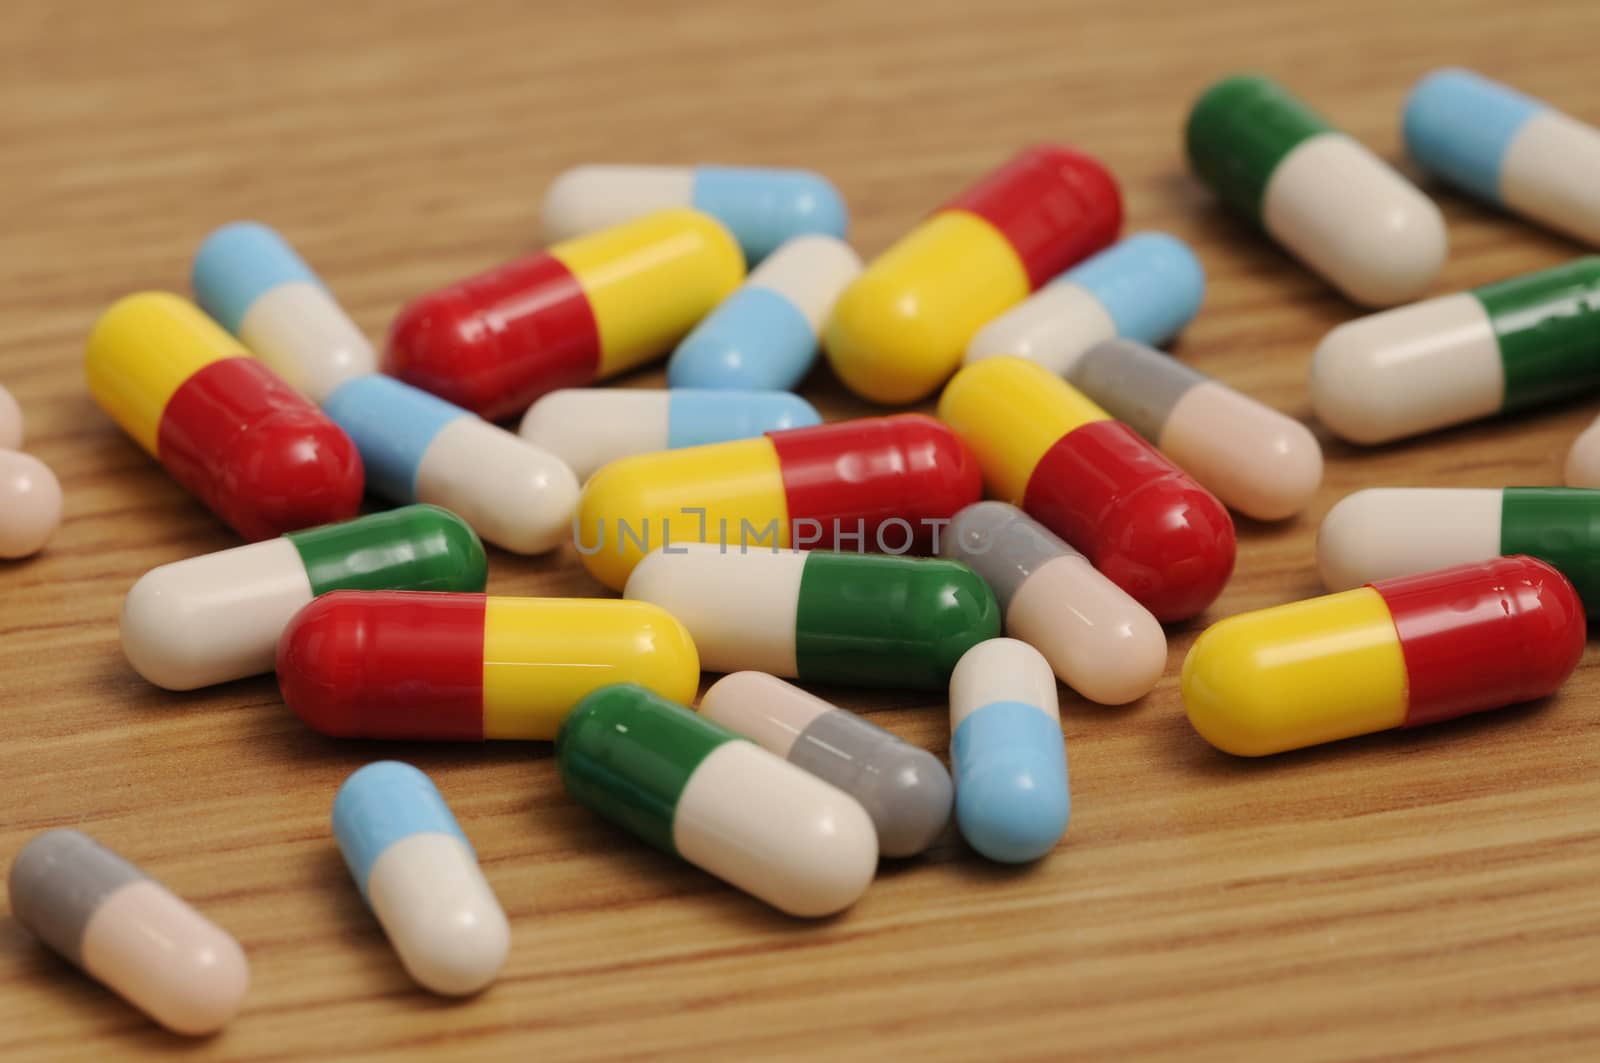 Some capsules and pills on white background